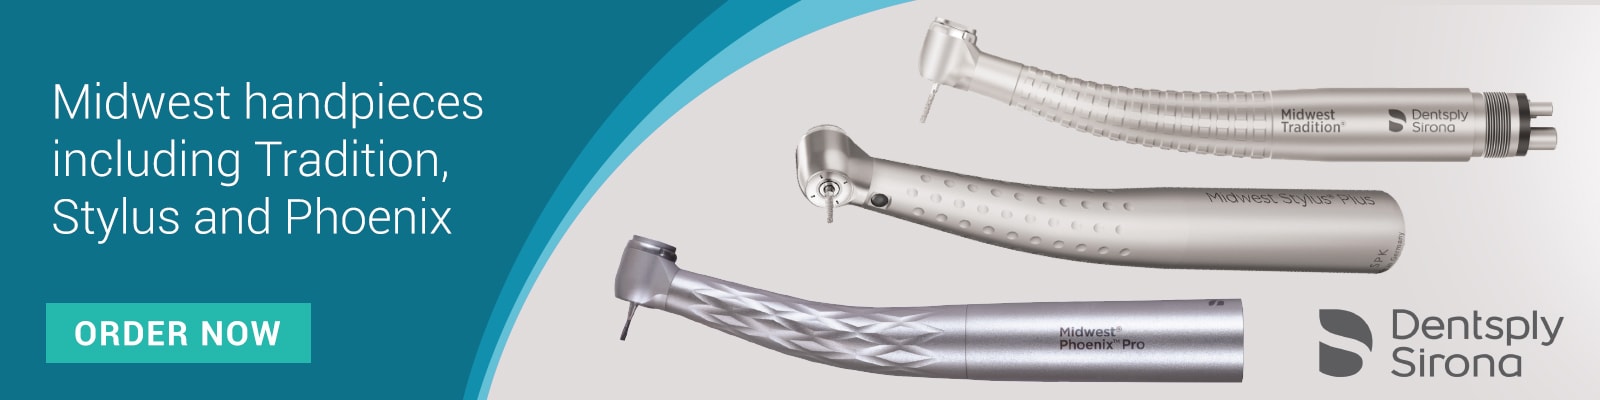 Tradition, Stylus and Phoenix Dentsply Sirona Midwest handpieces  